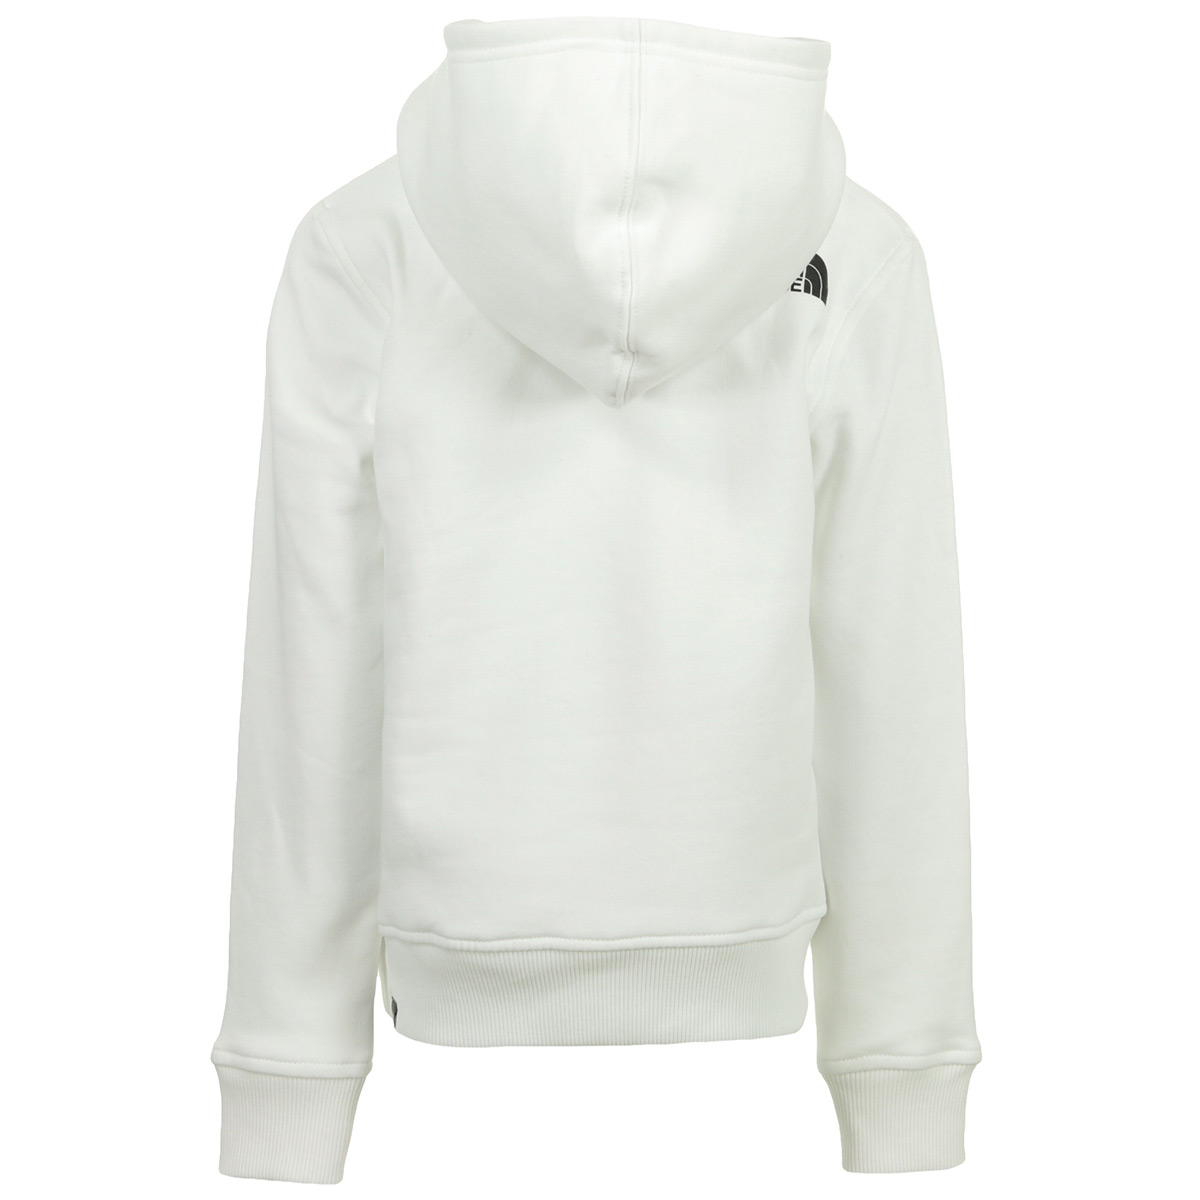 The North Face Y Box P O Hoodies